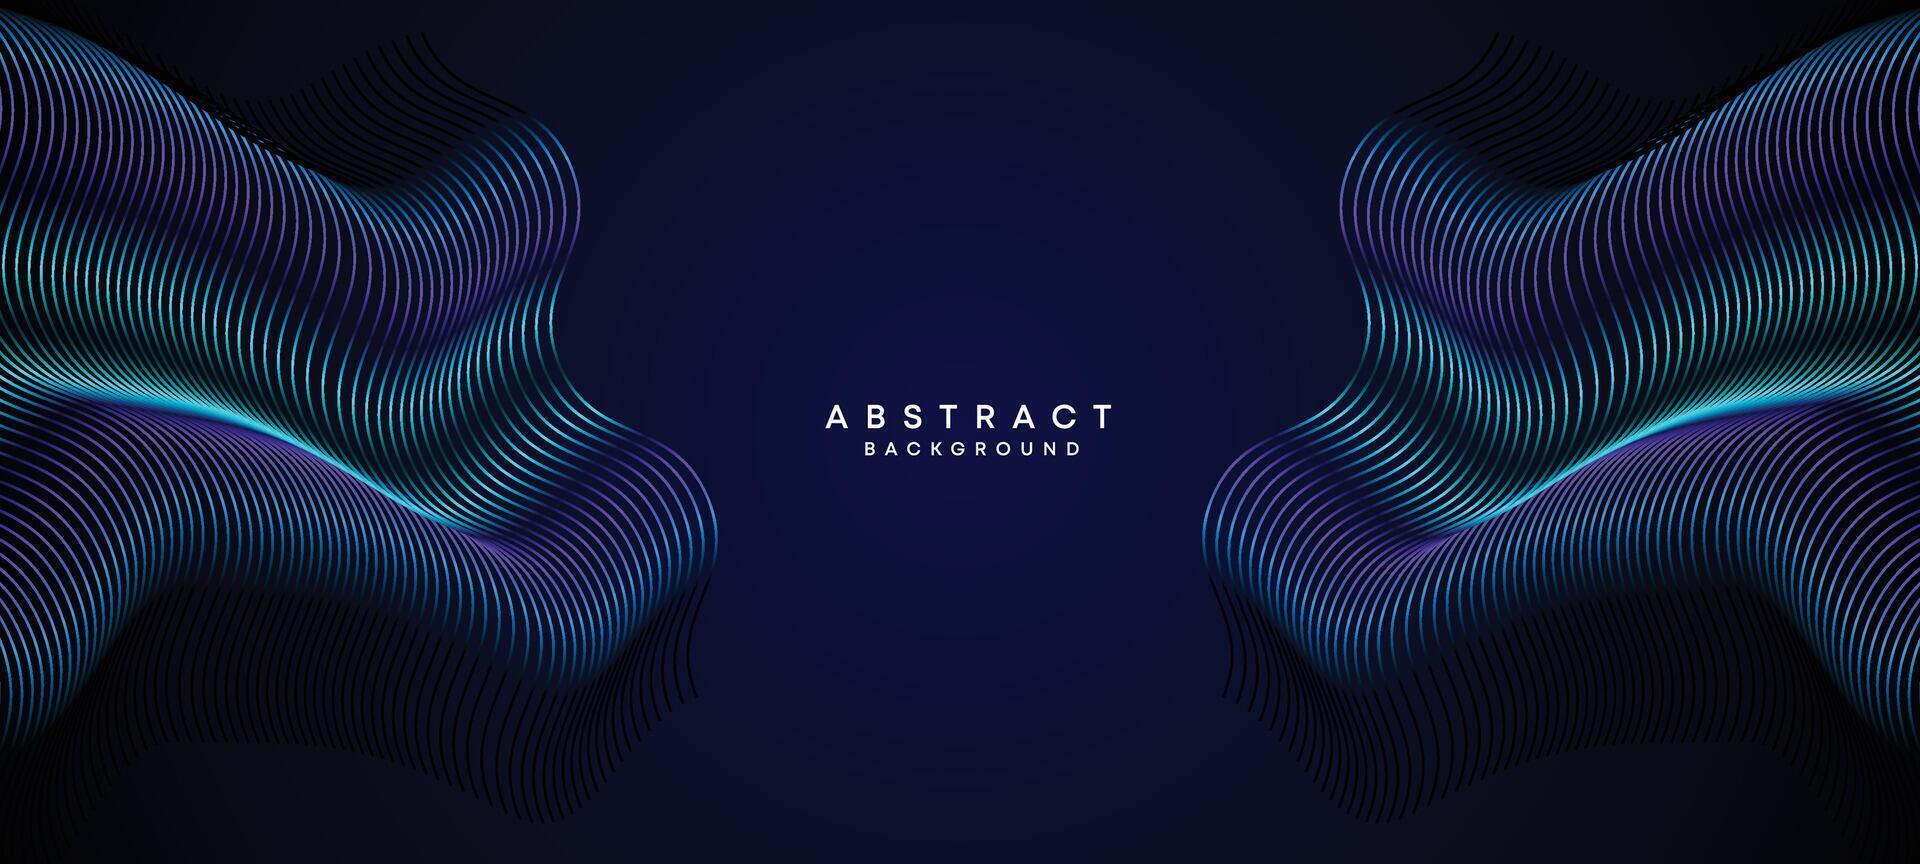 Abstract Dark Navy Blue Waving circles lines Technology Background. Modern Holo gradient with glowing lines shiny geometric shape and diagonal, for brochure, cover, poster, banner, website, header vector